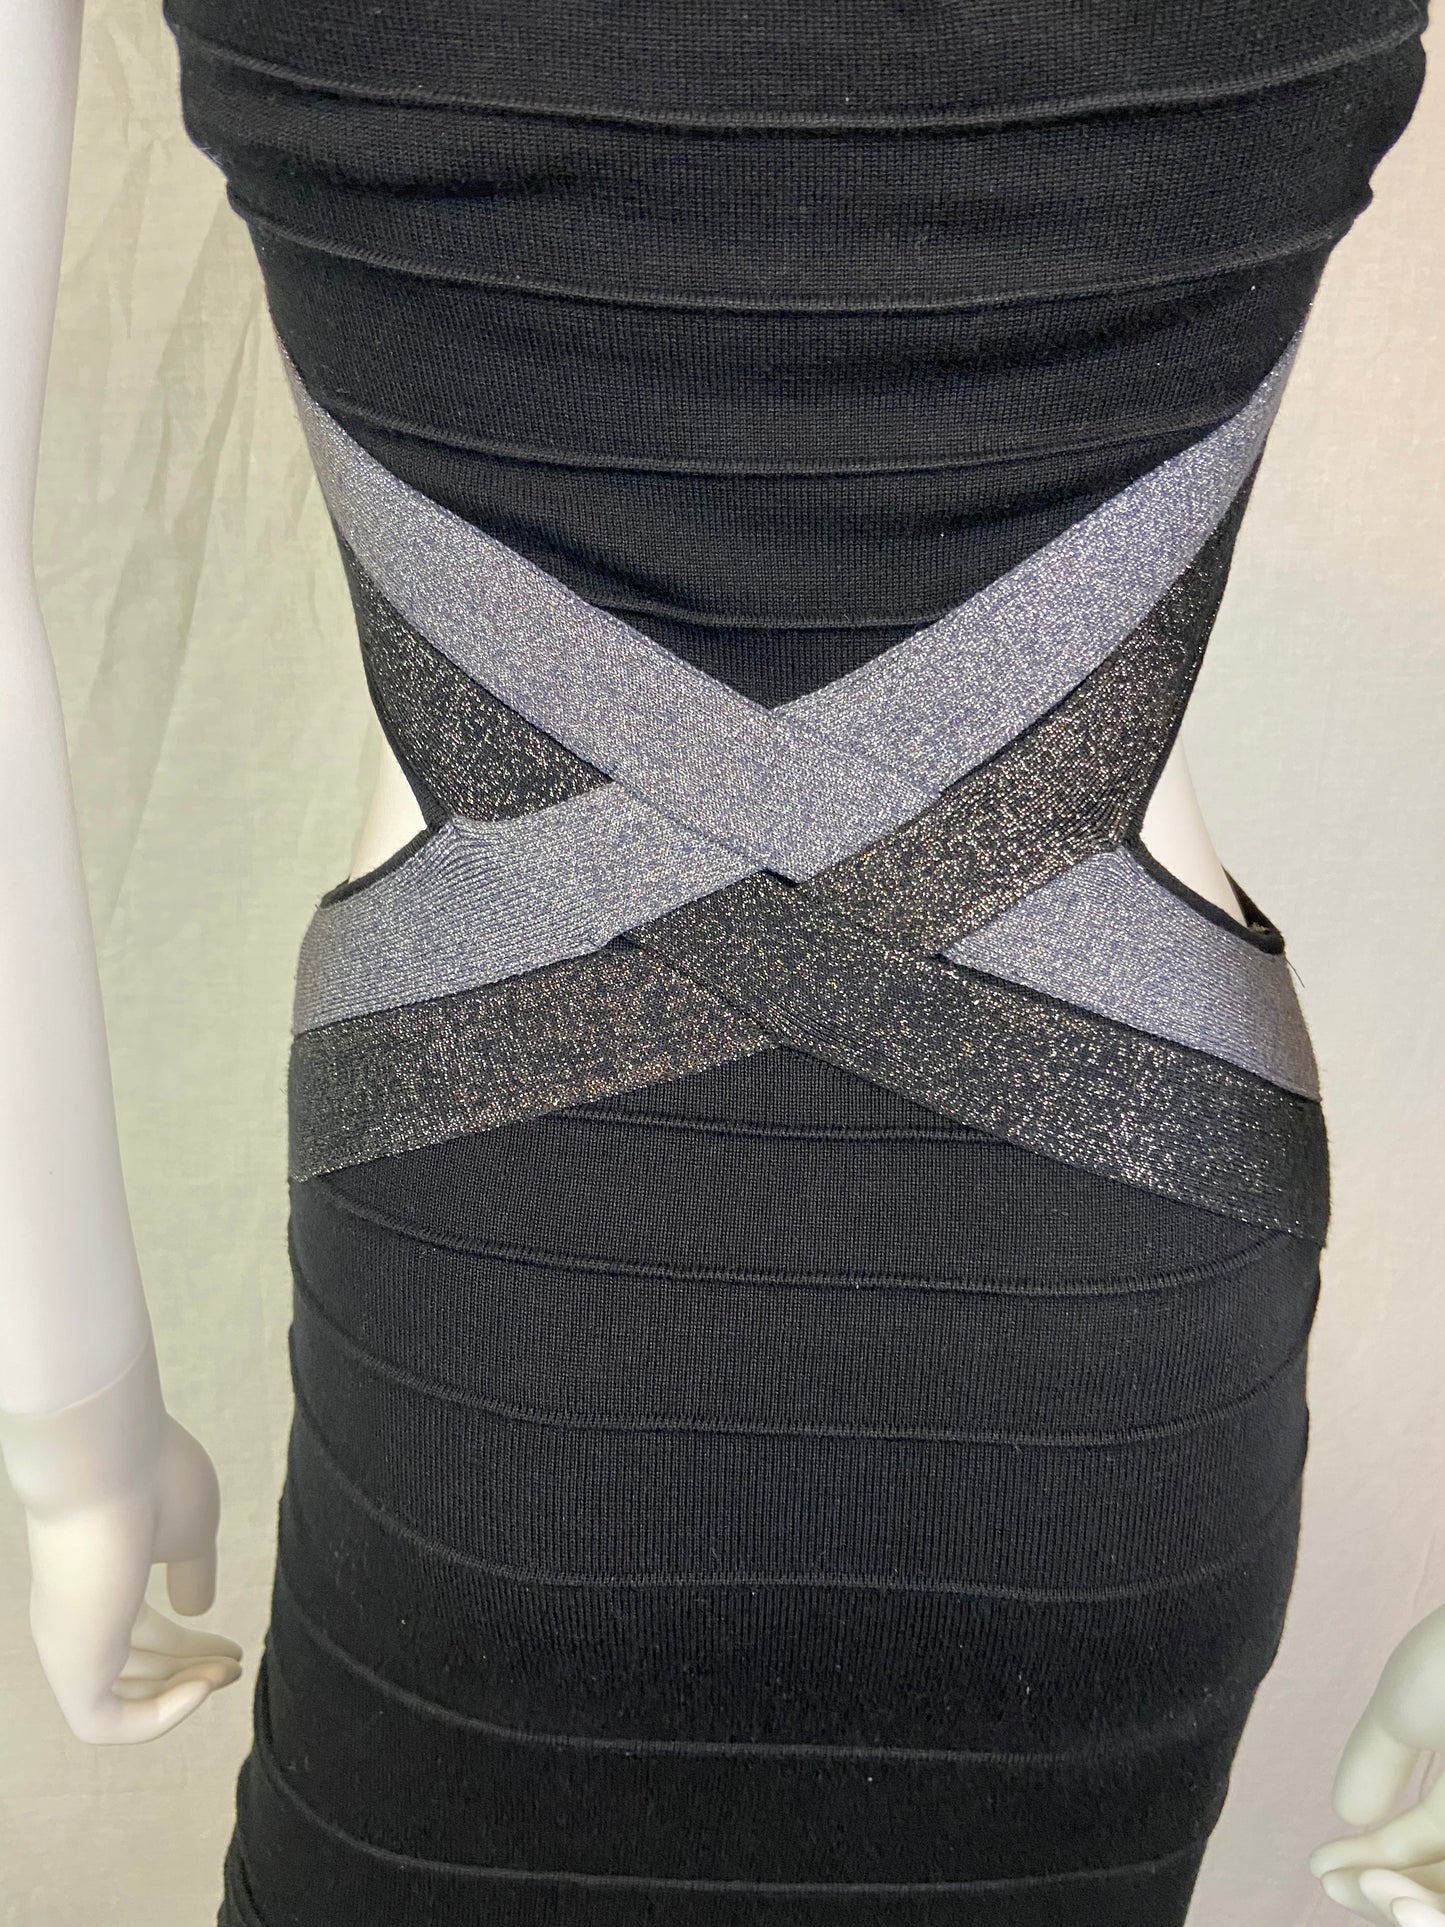 Wow Couture Black Silver Gray Glitter Cut Out Bandage Dress